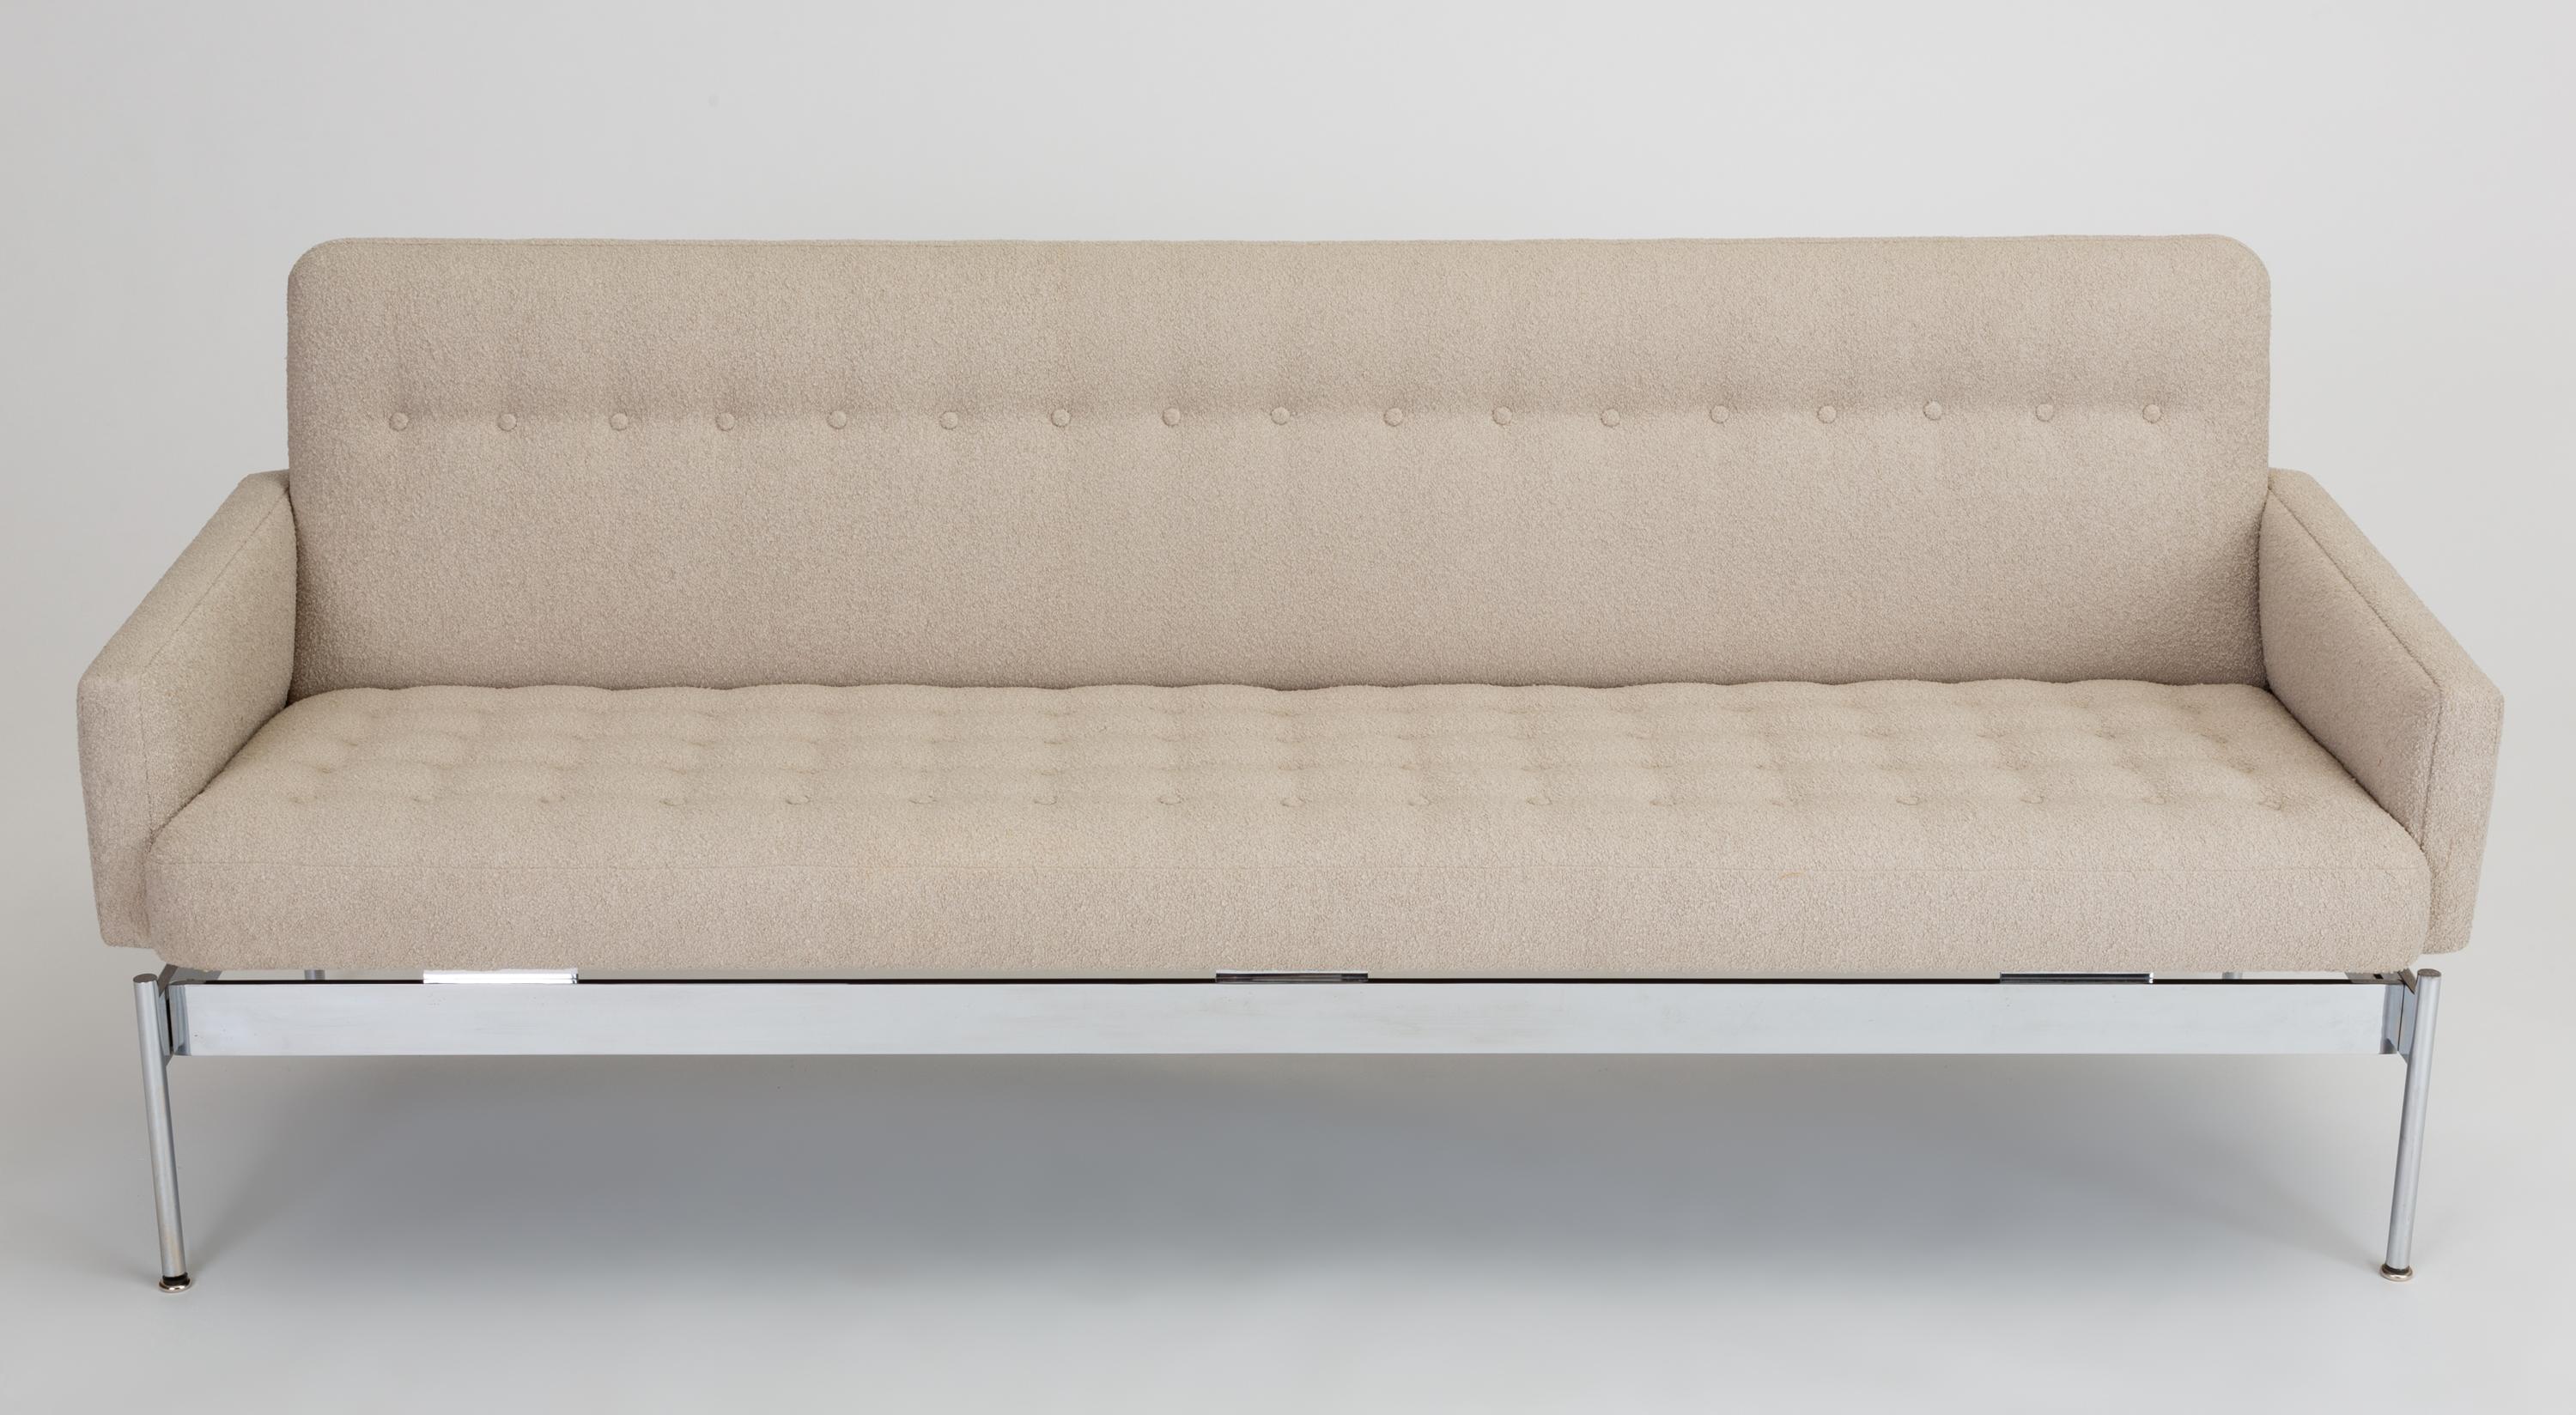 A Mid-Century Modern sofa with a slender profile sits atop a chrome base. The integrated cushion is button tufted, and a single row of buttons decorates the angled backrest. Each side is framed by a slim upholstered arm. The seat is angled to float